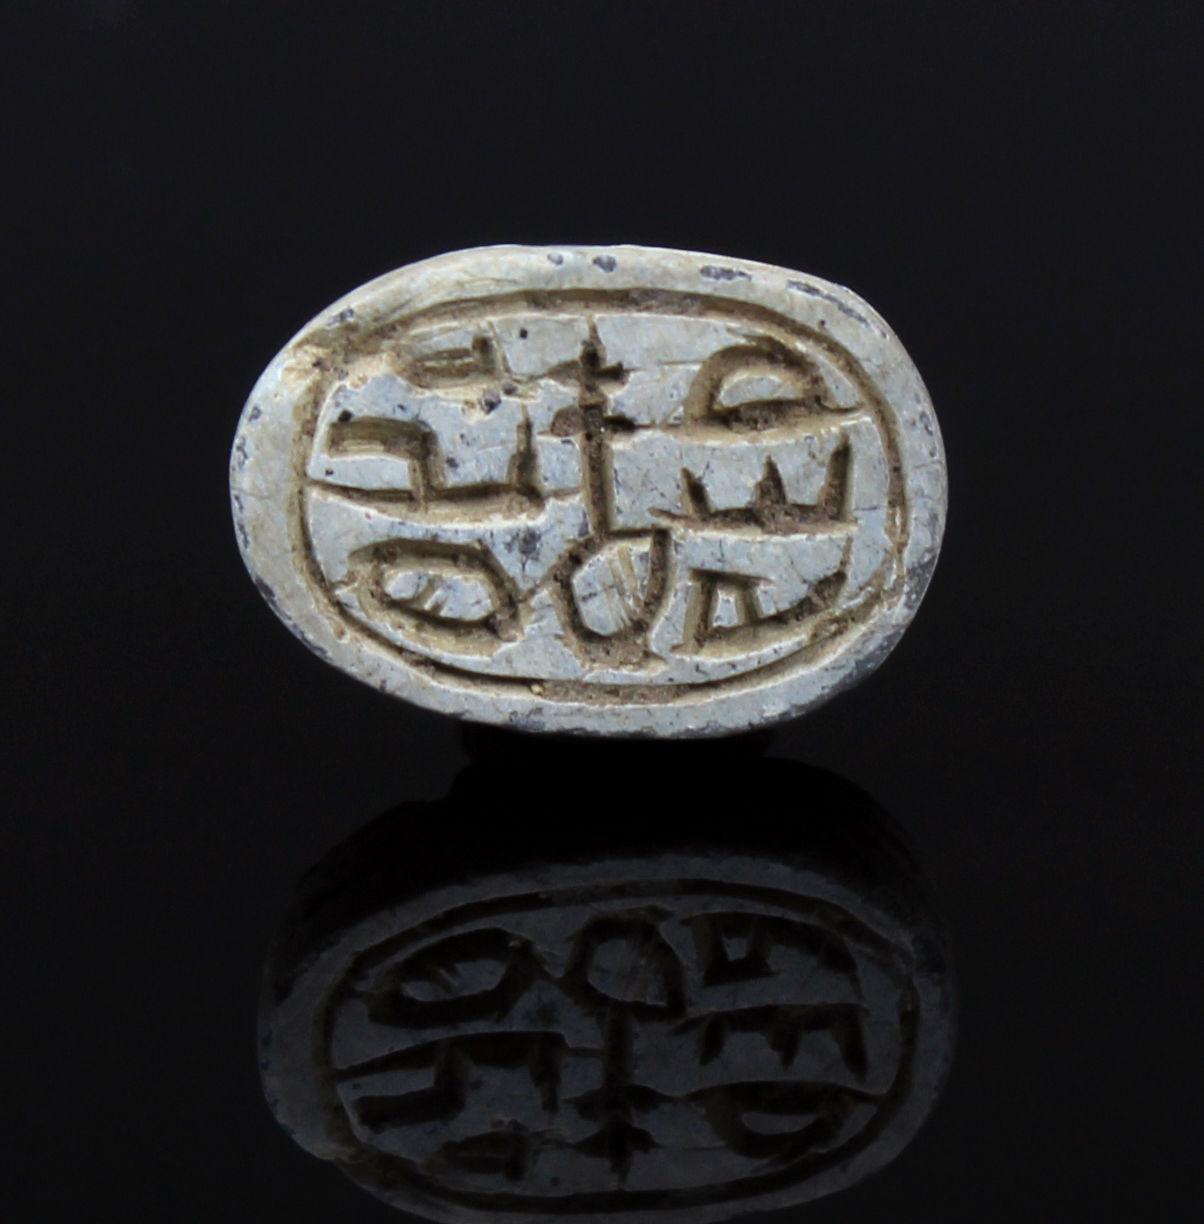 ITEM: Scarab with pseudo-hieroglyphic, Anra-type
MATERIAL: Steatite
CULTURE: Egyptian
PERIOD: Second Intermediate Period, 1700 – 1550 B.C
DIMENSIONS: 10 mm x 15 mm
CONDITION: Good condition
PROVENANCE: Ex American egyptologist collection, active in